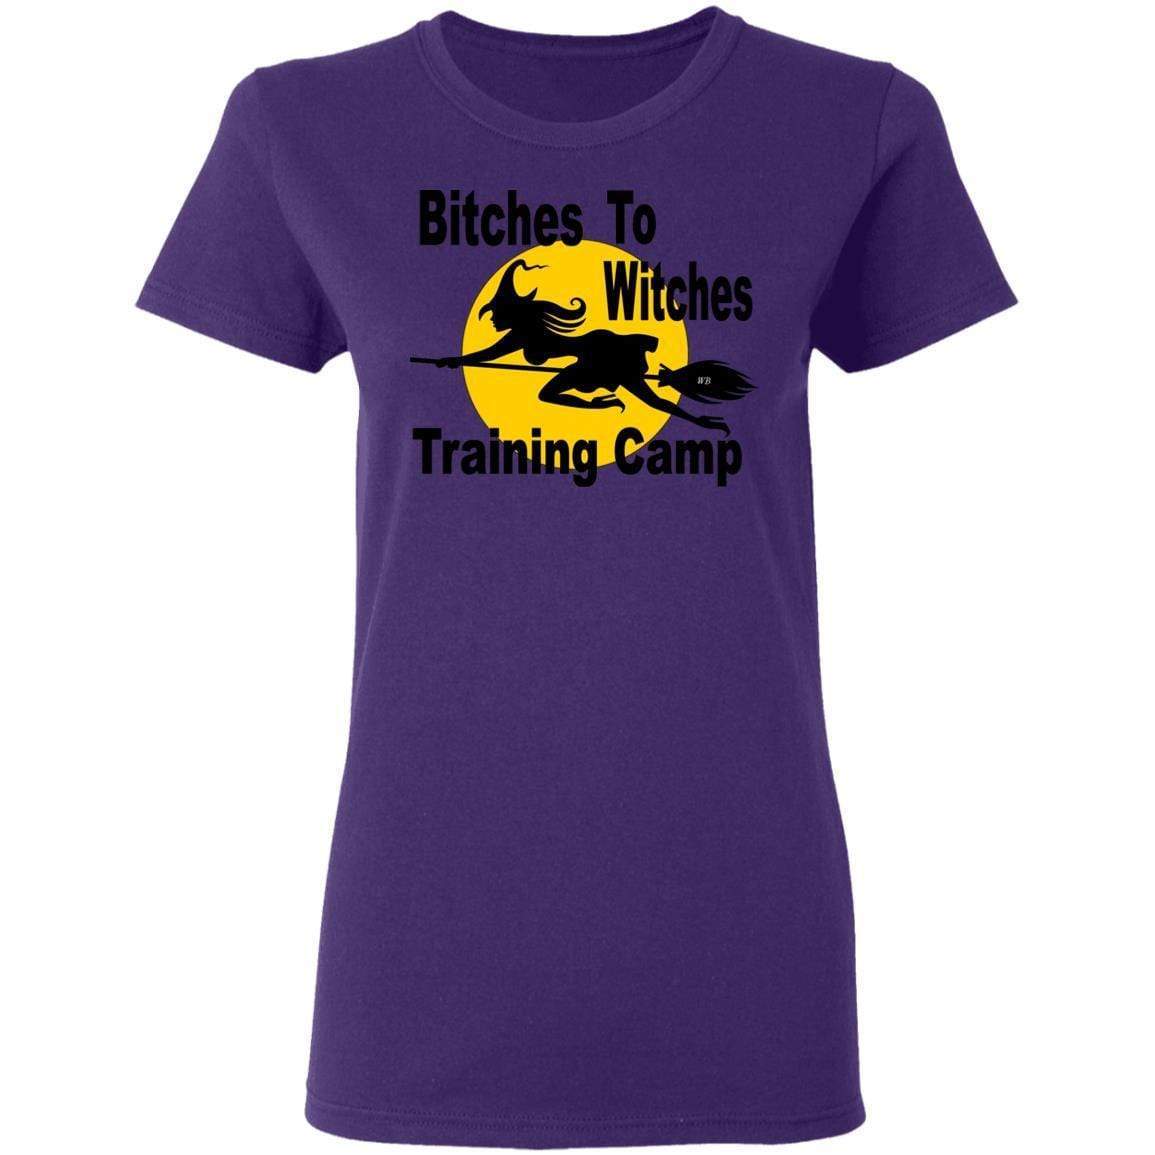 T-Shirts Purple / S WineyBitches.Co "Bitches To Witches Training Camp" Halloween Ladies' 5.3 oz. T-Shirt WineyBitchesCo